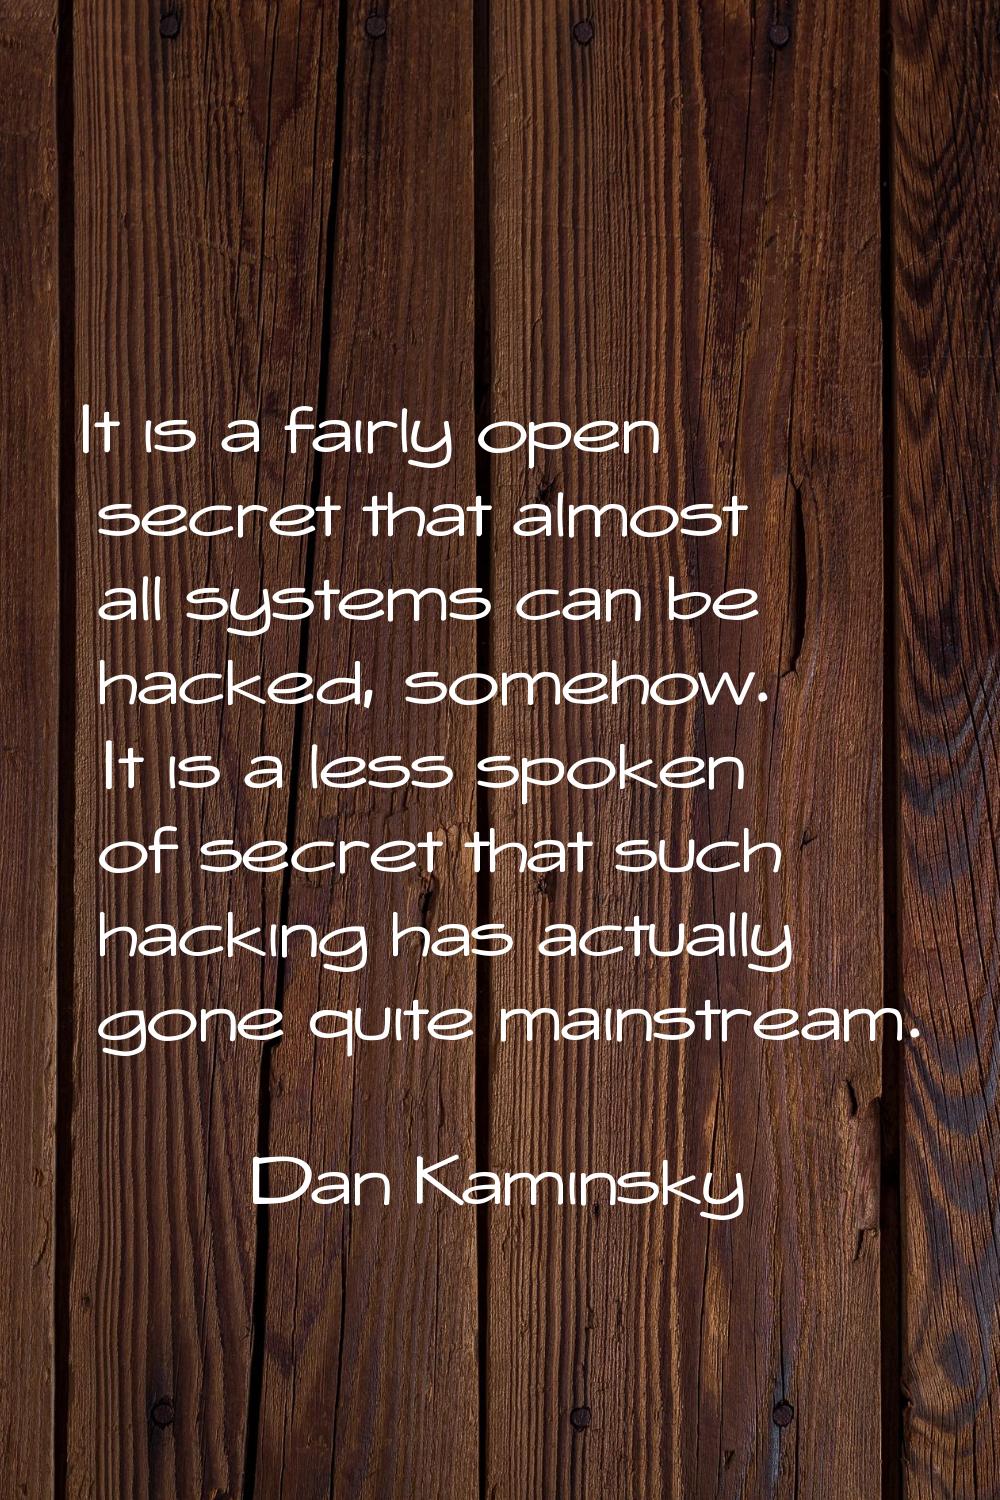 It is a fairly open secret that almost all systems can be hacked, somehow. It is a less spoken of s